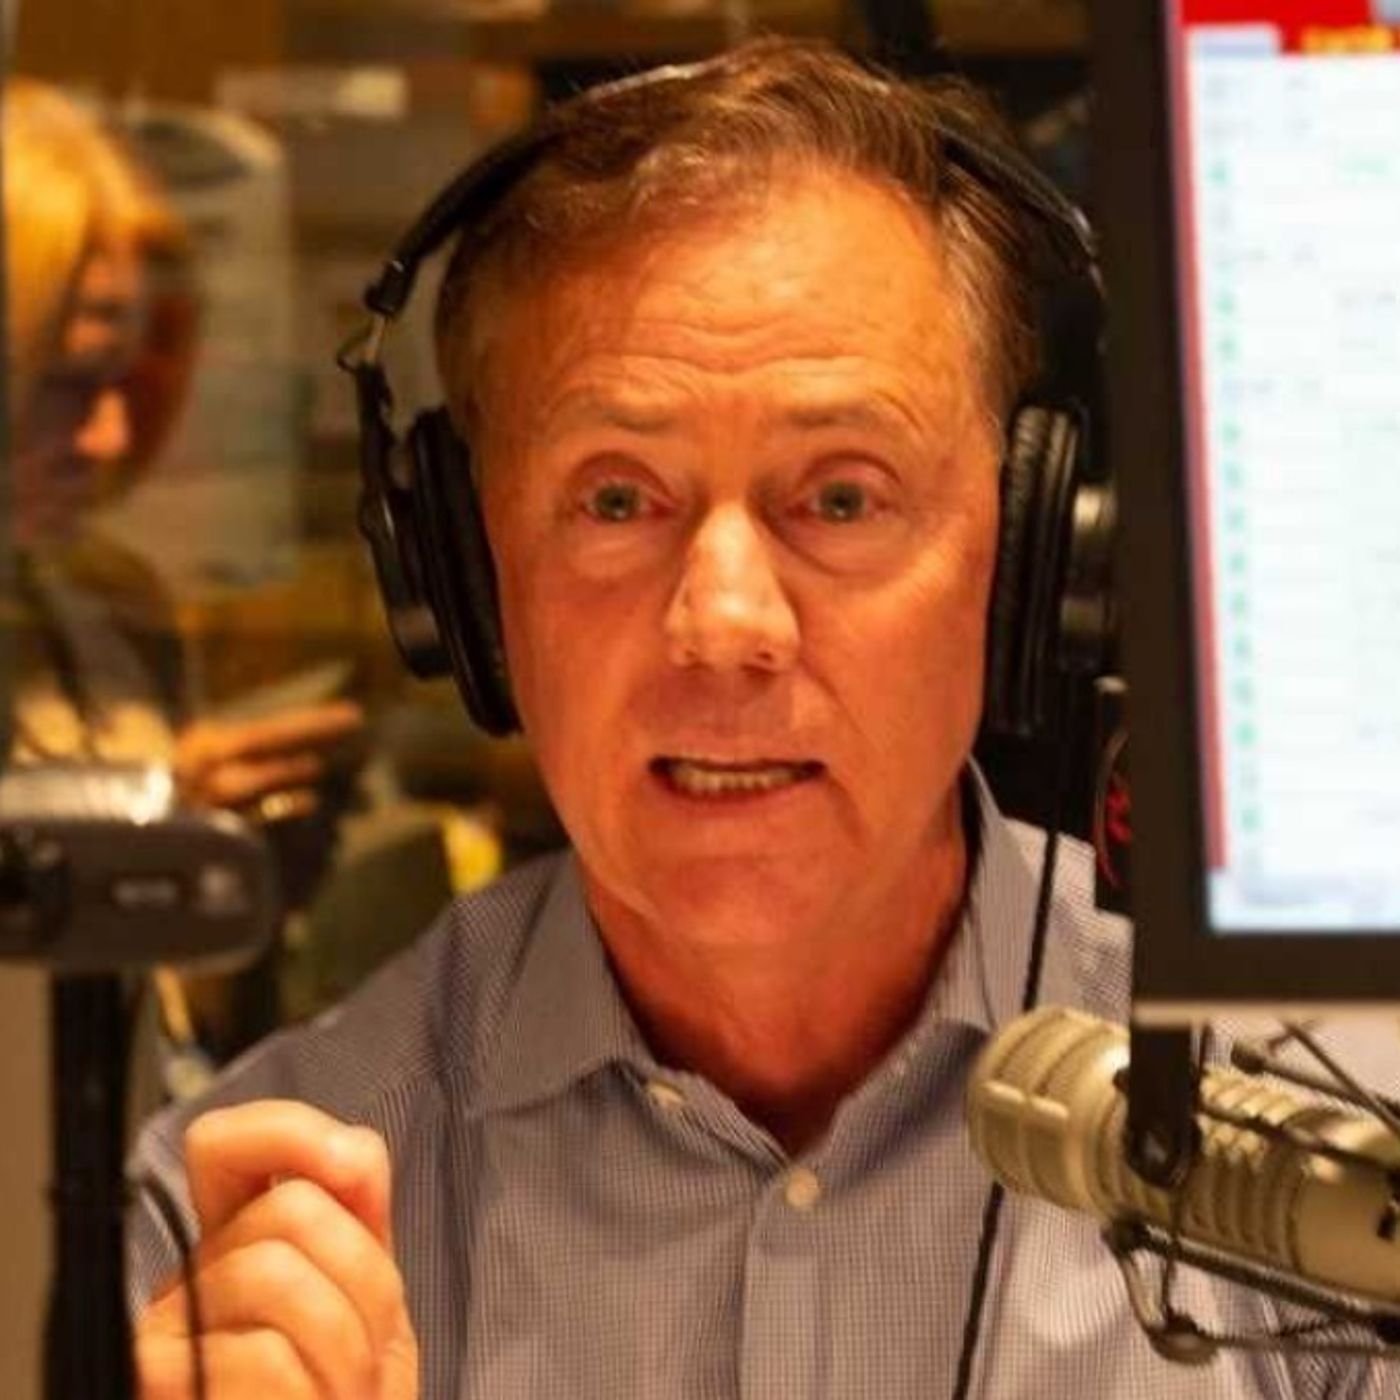 Governor Lamont on COVID-19 Cases in CT, The May 20th Deadline, and More